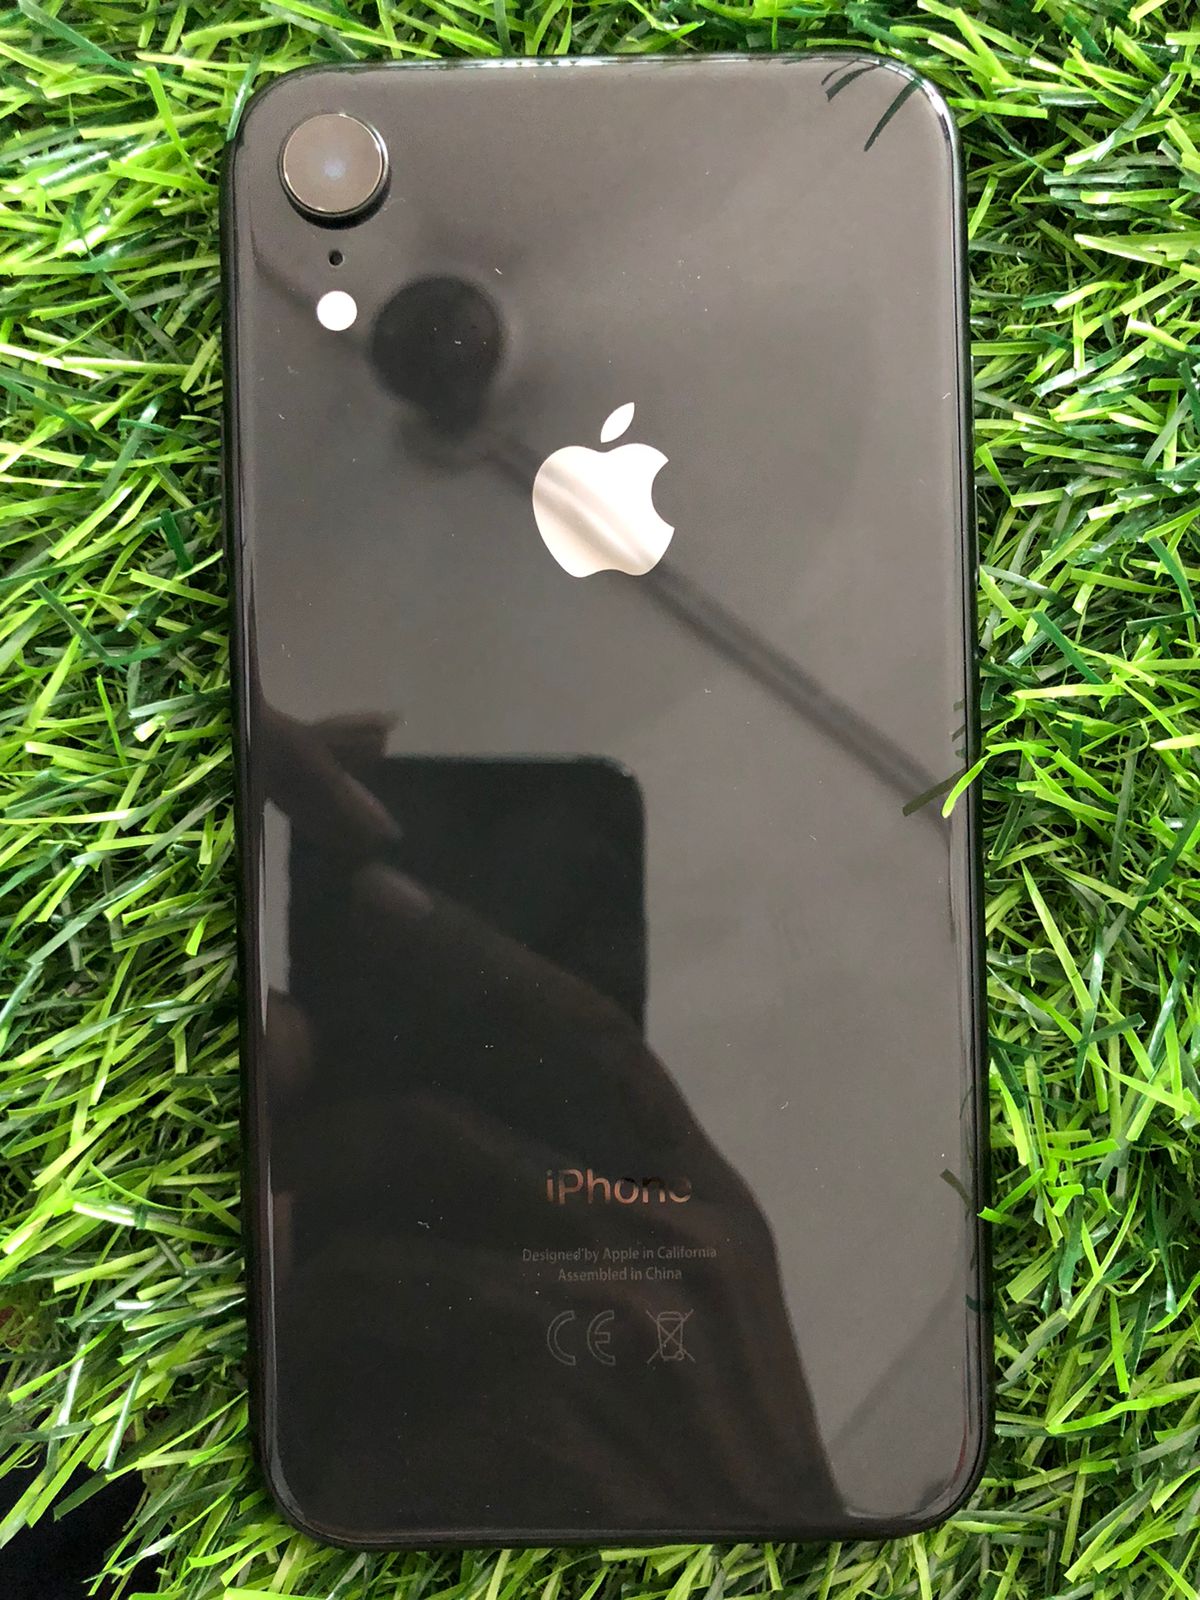 Details View - Iphone xr 64gb black color price photos - iphone xr price ahmedabad, iphone xr 64gb black price in ahmedabad, buy apple iphone xr online, iphone xr black color features, apple iphone xr 64gb India, affordable iphone xr for sale, best deals on iphone xr, iphone xr installment options, apple warranty for iphone xr, iphone xr battery health percentage, contact details for iphone xr purchase, reseller bazzar
